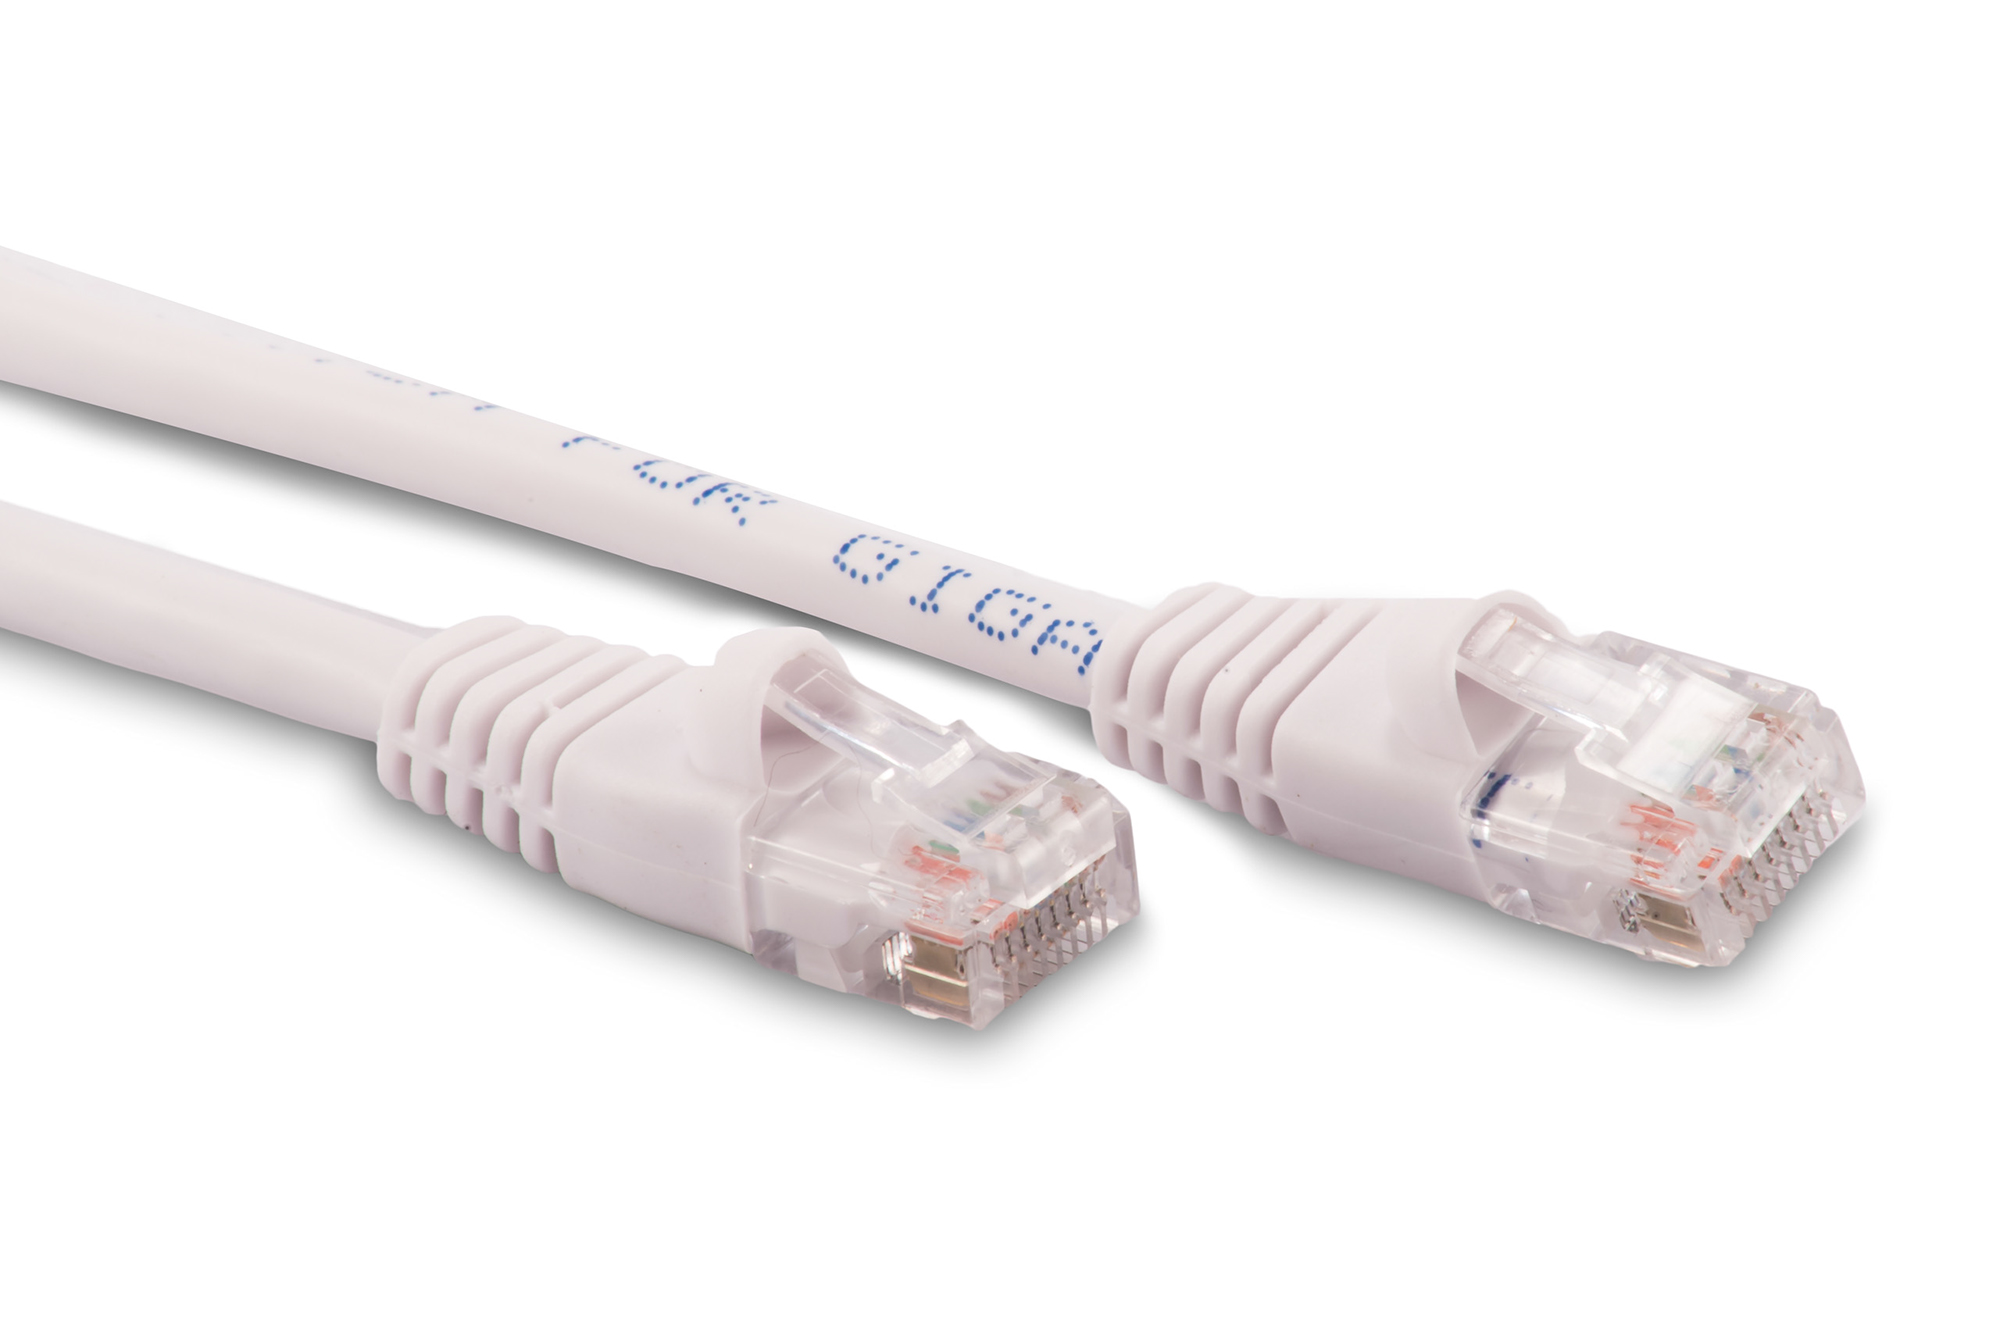 50ft Cat6 Ethernet Patch Cable - White Color - Snagless Boot